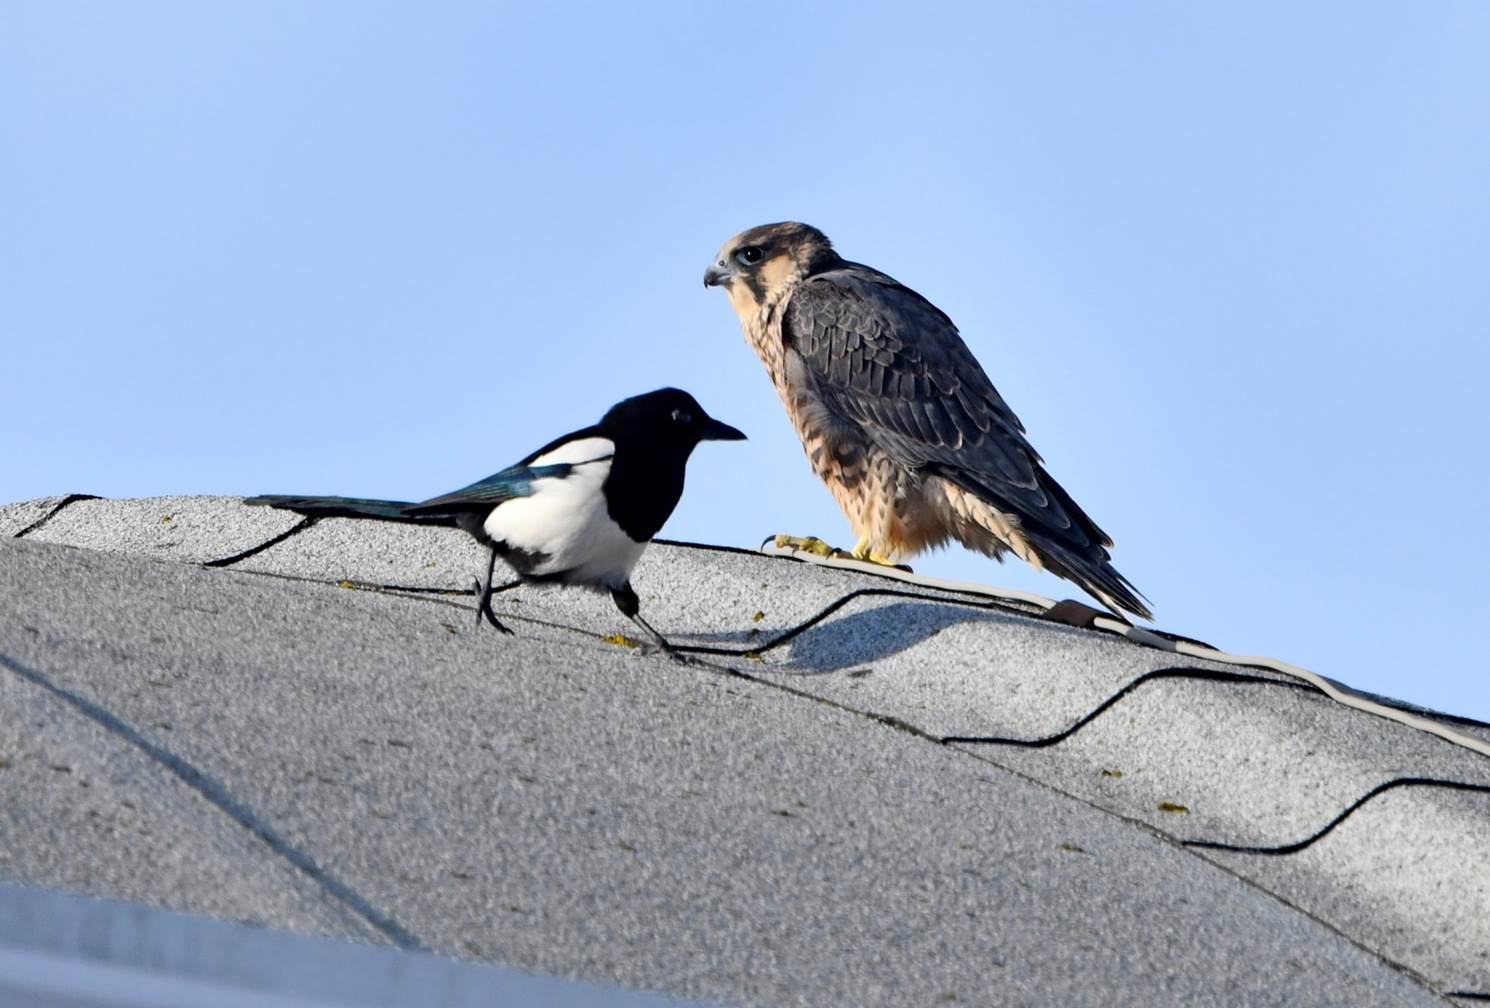 A couple of birds on a roof

Description automatically generated with medium confidence